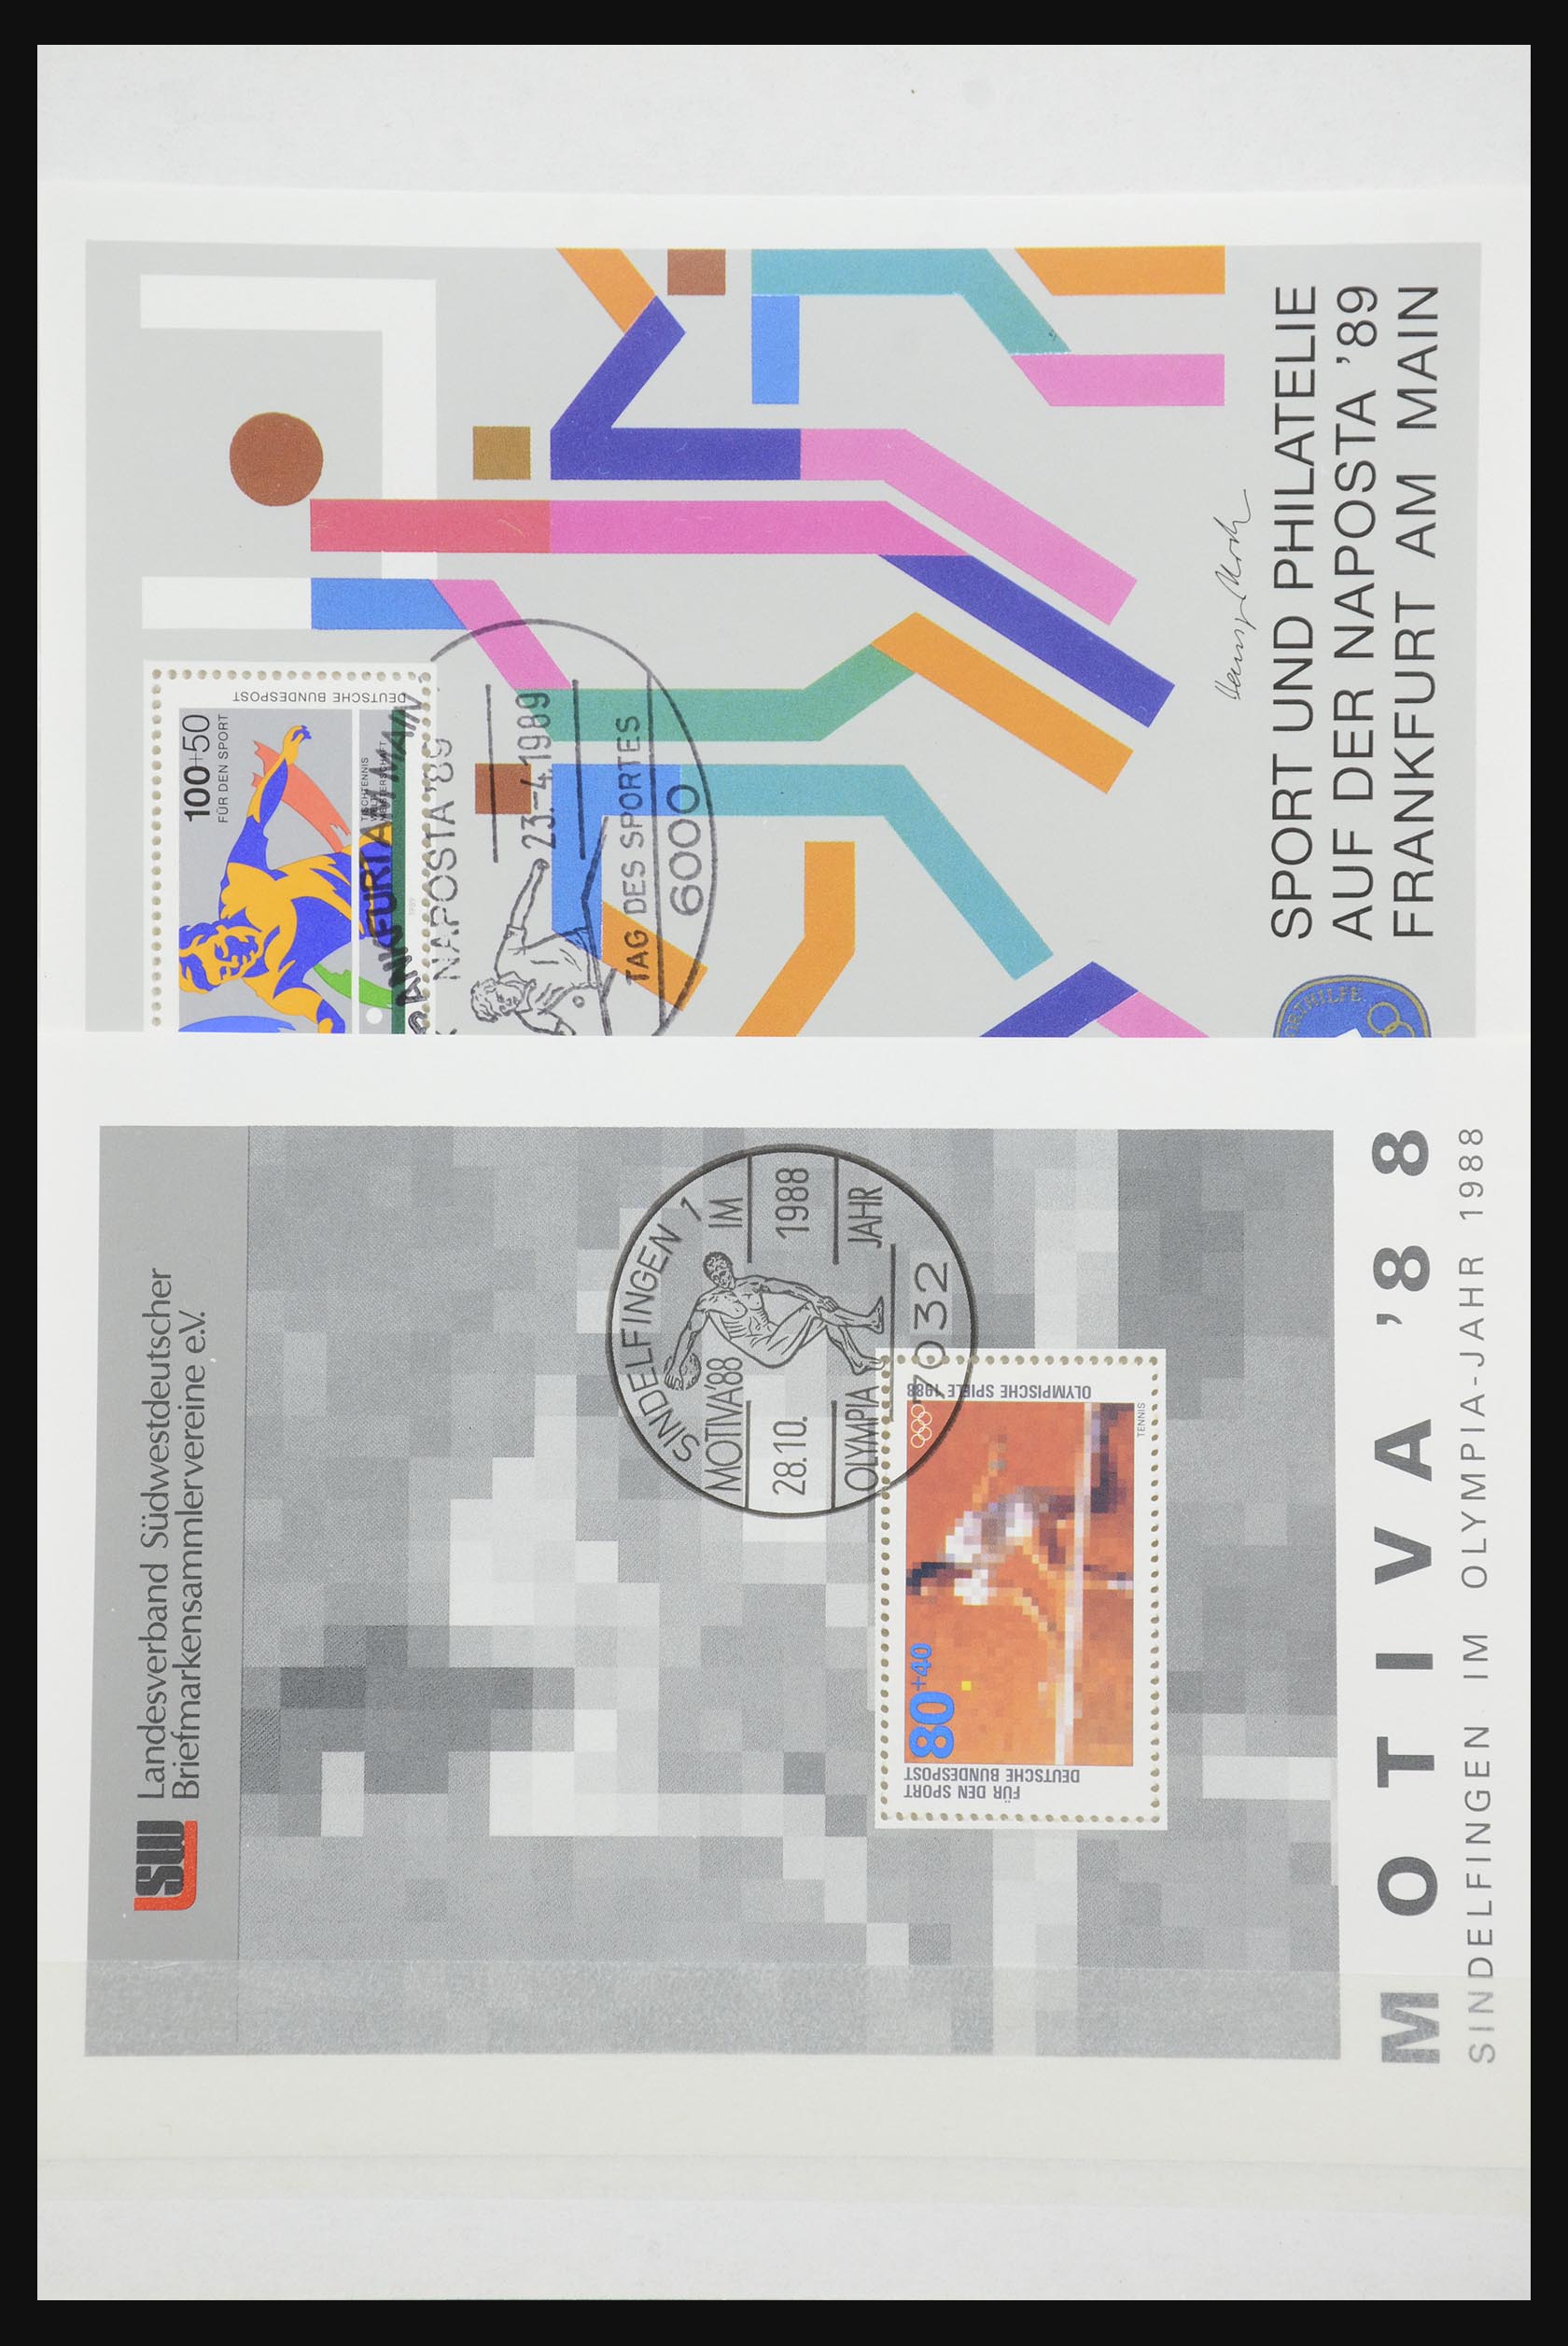 32050 047 - 32050 Bundespost special sheets 1980-2010.